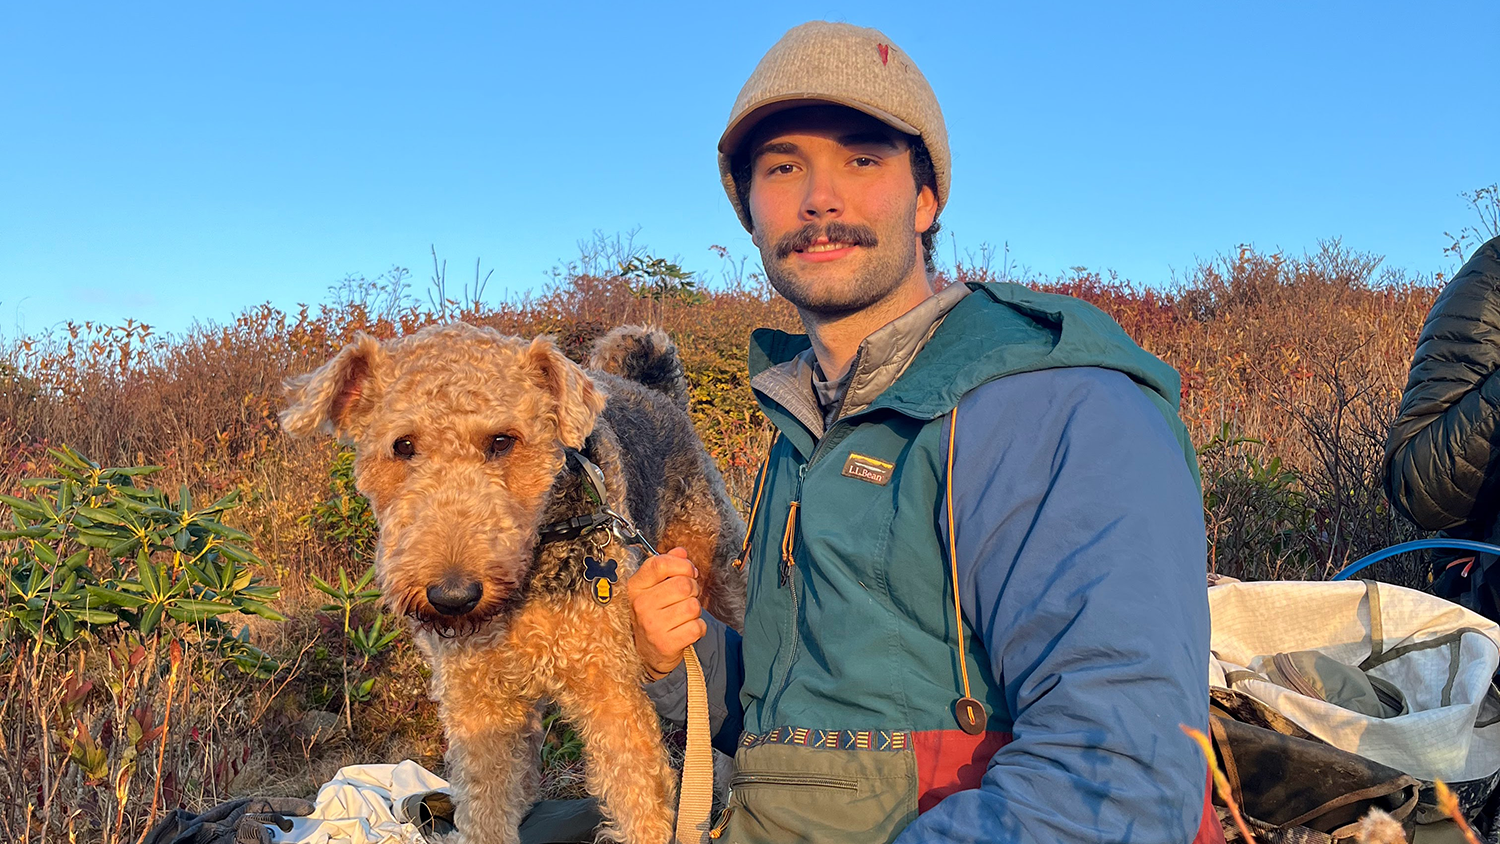 Houston Bumgarner and his dog, Chewie, sitting at Black Balsam Knob - Graduation to Vocation: Houston Bumgarner is Protecting California's Wildlife - College of Natural Resources News NC State University